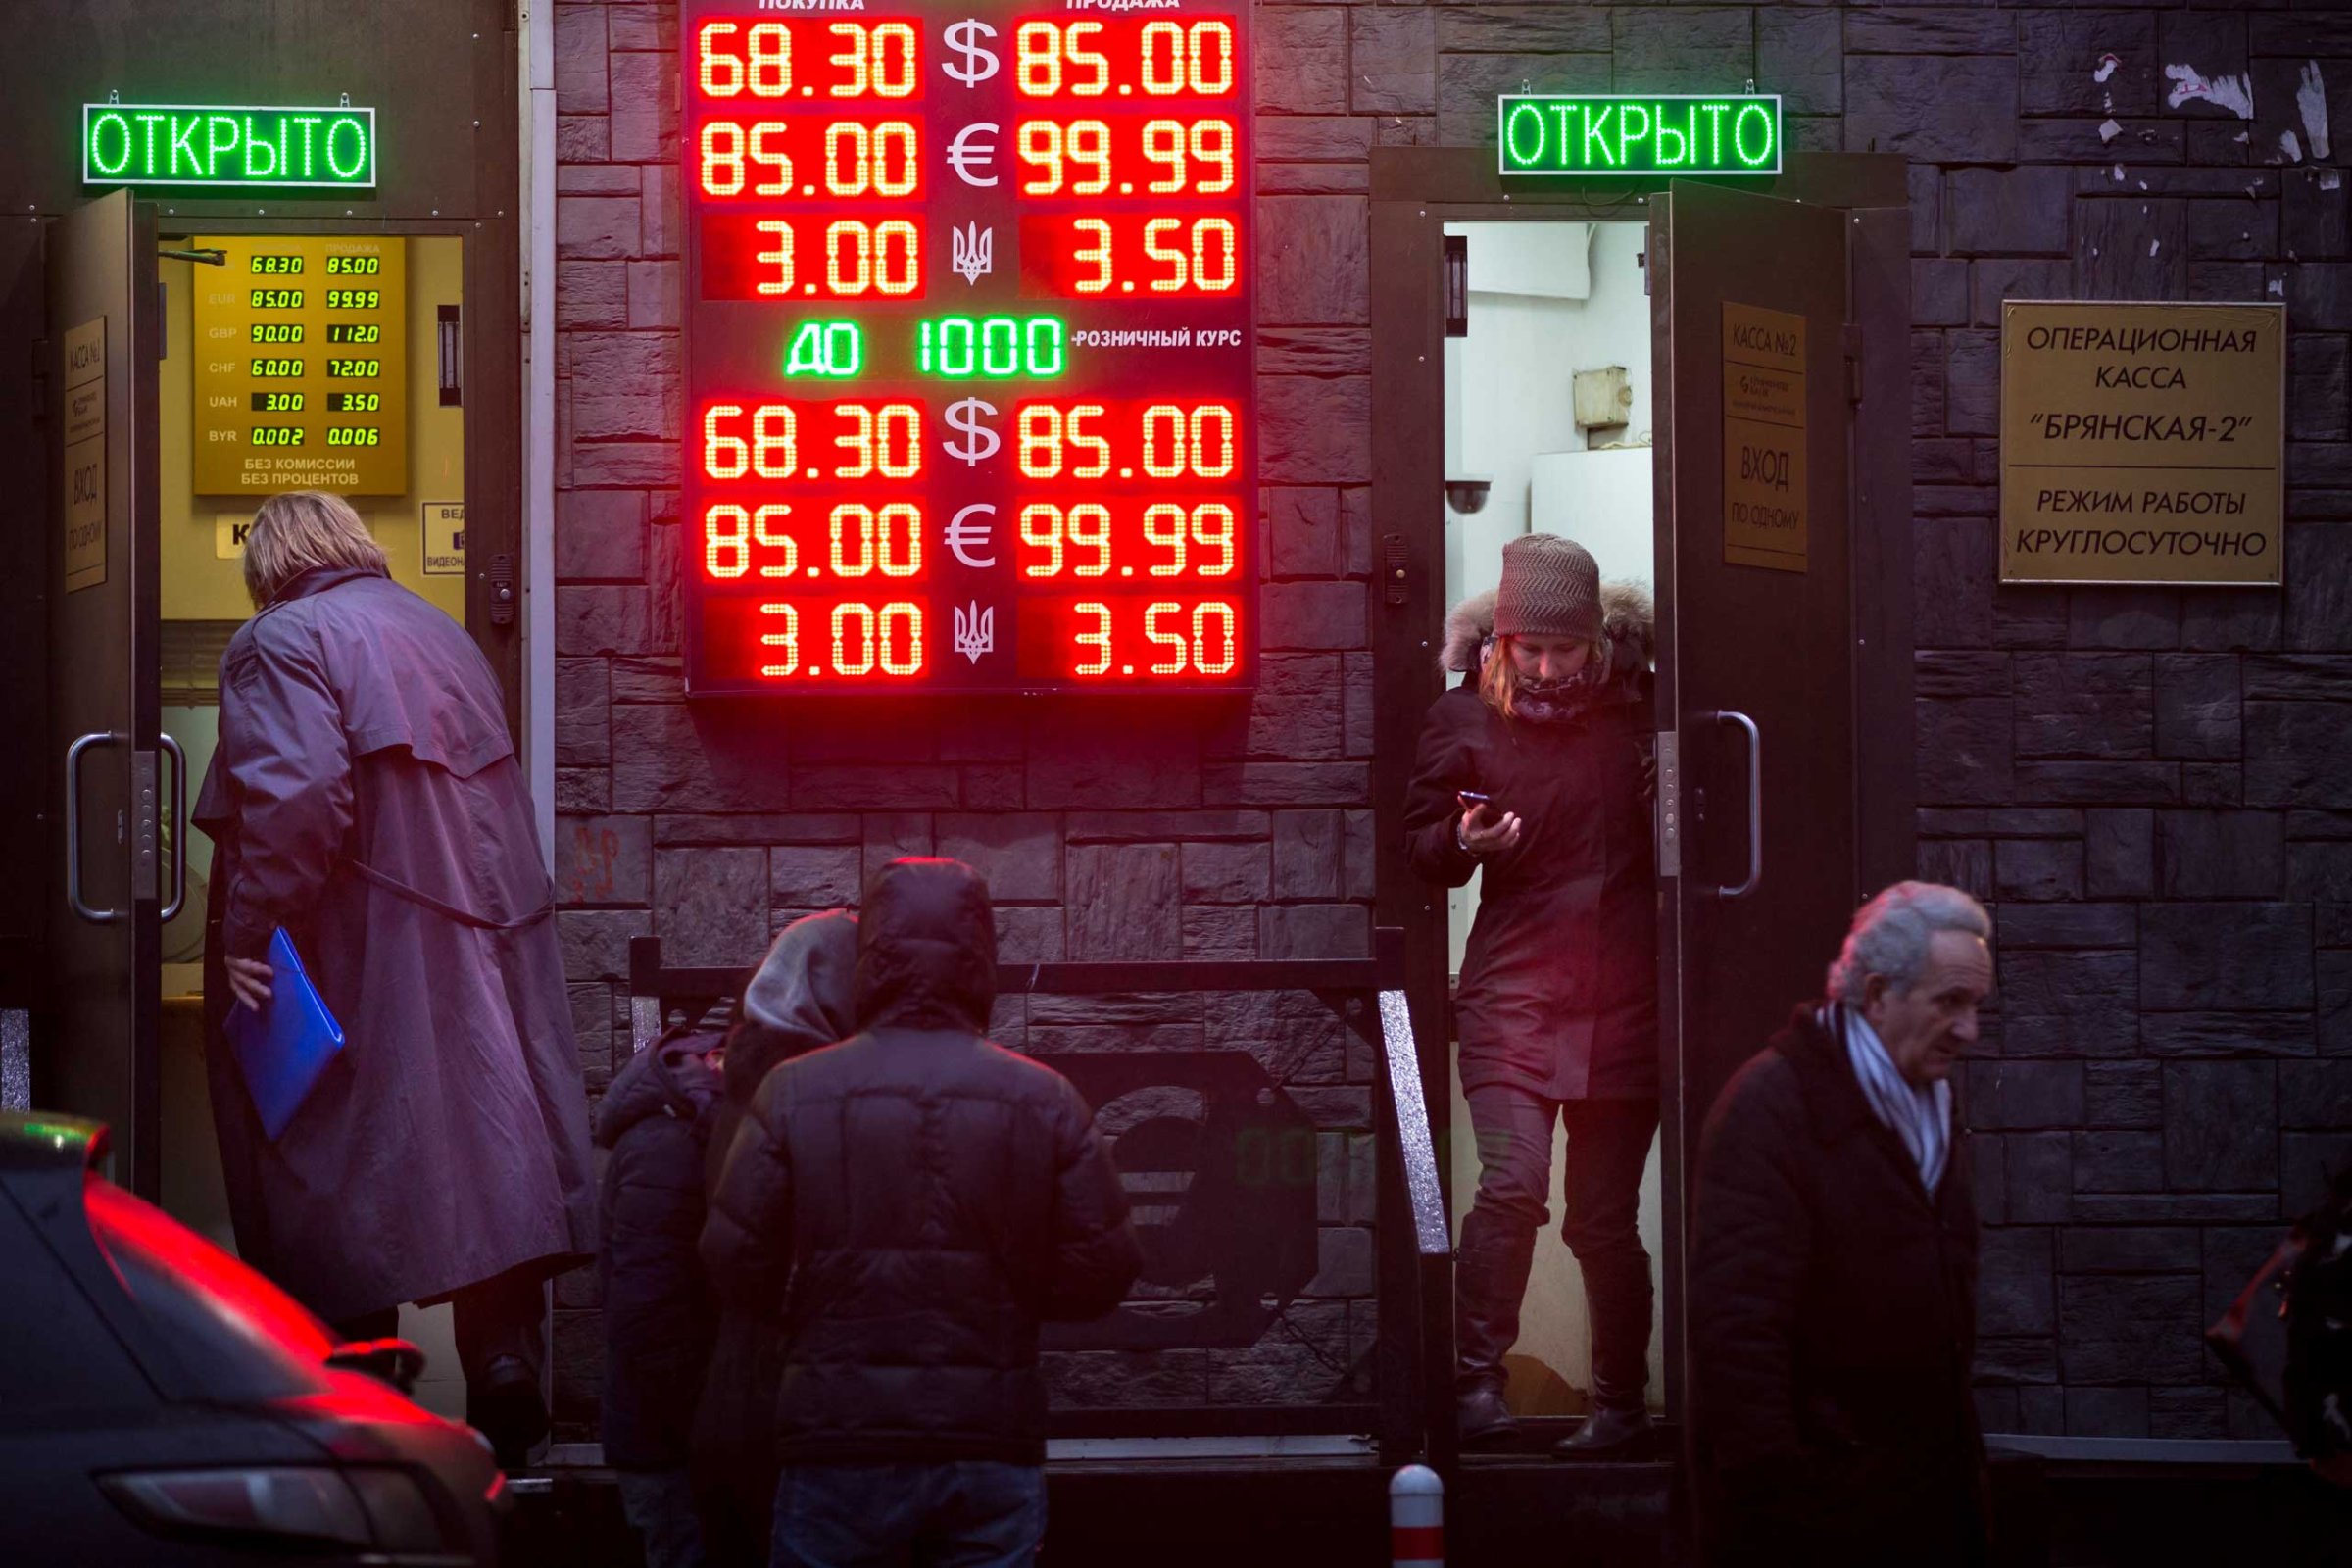 People wait to exchange their currency as signs advertise the exchange rates at a currency exchange office in Moscow, Dec. 16, 2014.